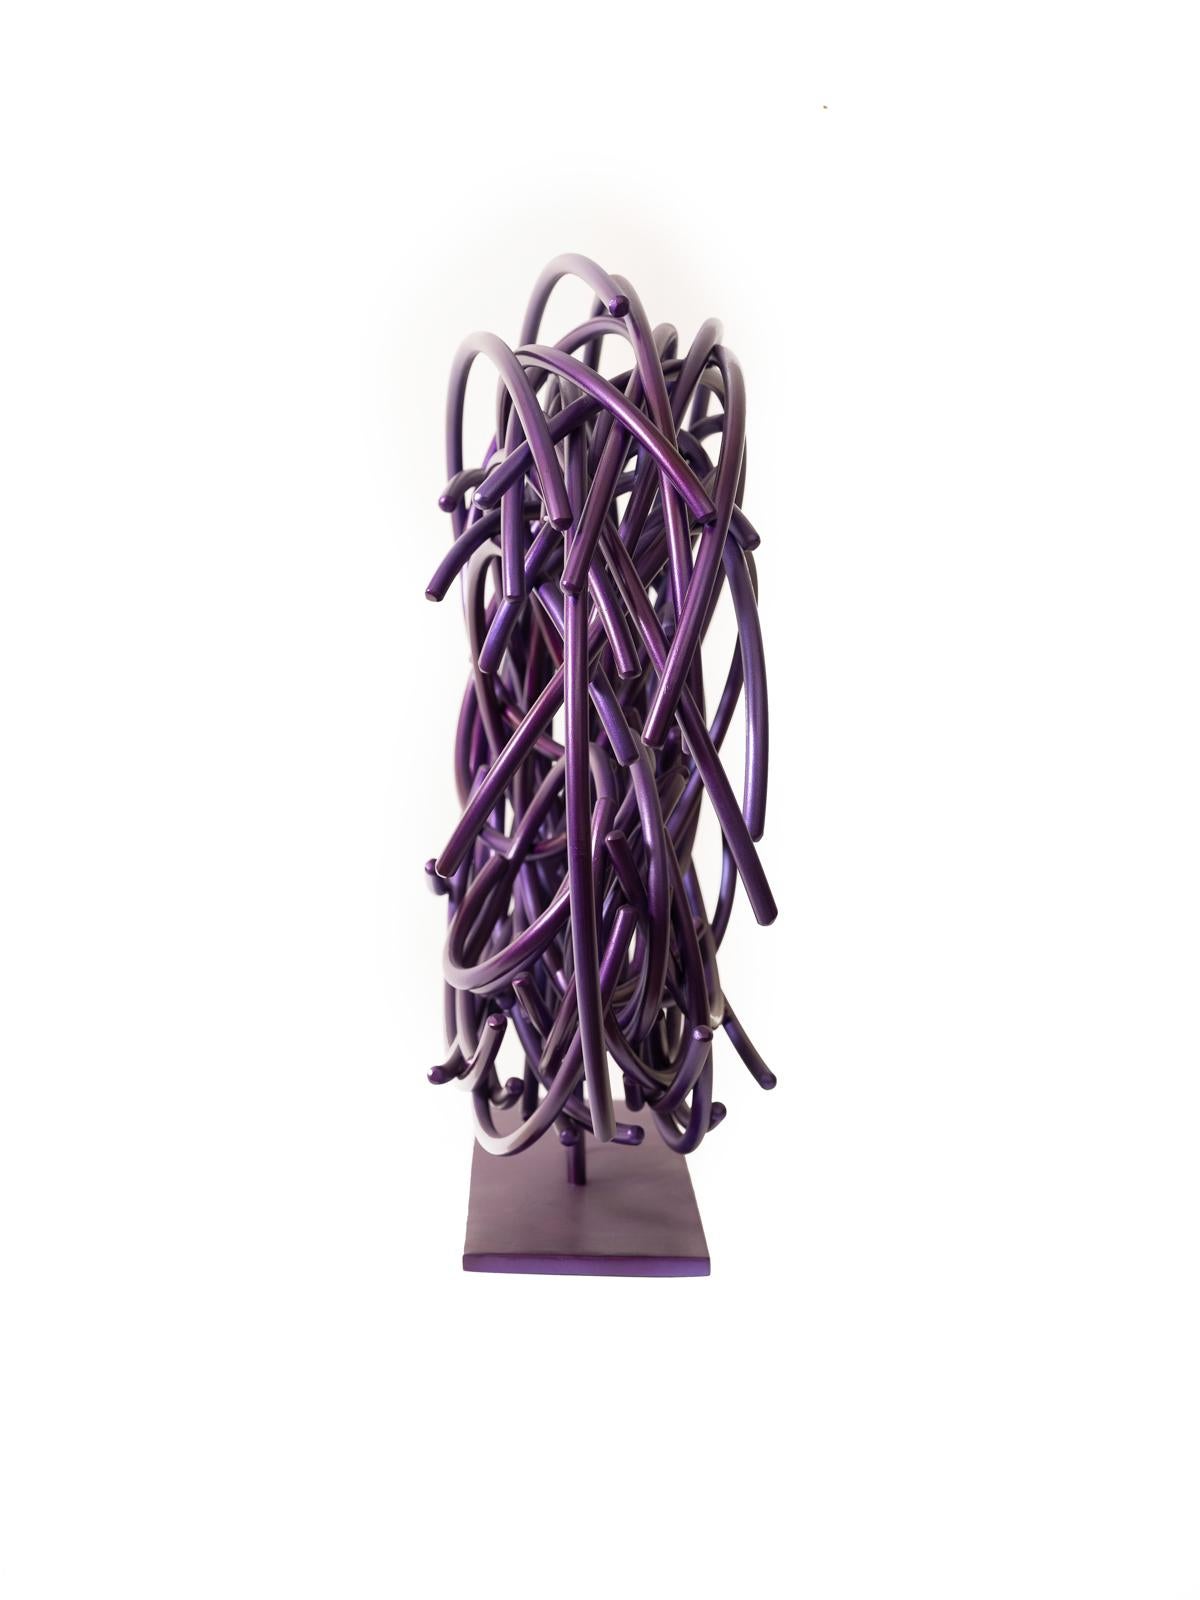 In a gorgeous aubergine colour, this dynamic sculpture by Shayne Dark is part of an exciting new series called Maelstrom. Known for his uniquely beautiful abstract work, this piece is hand forged from small round aluminum rods formed into a circular